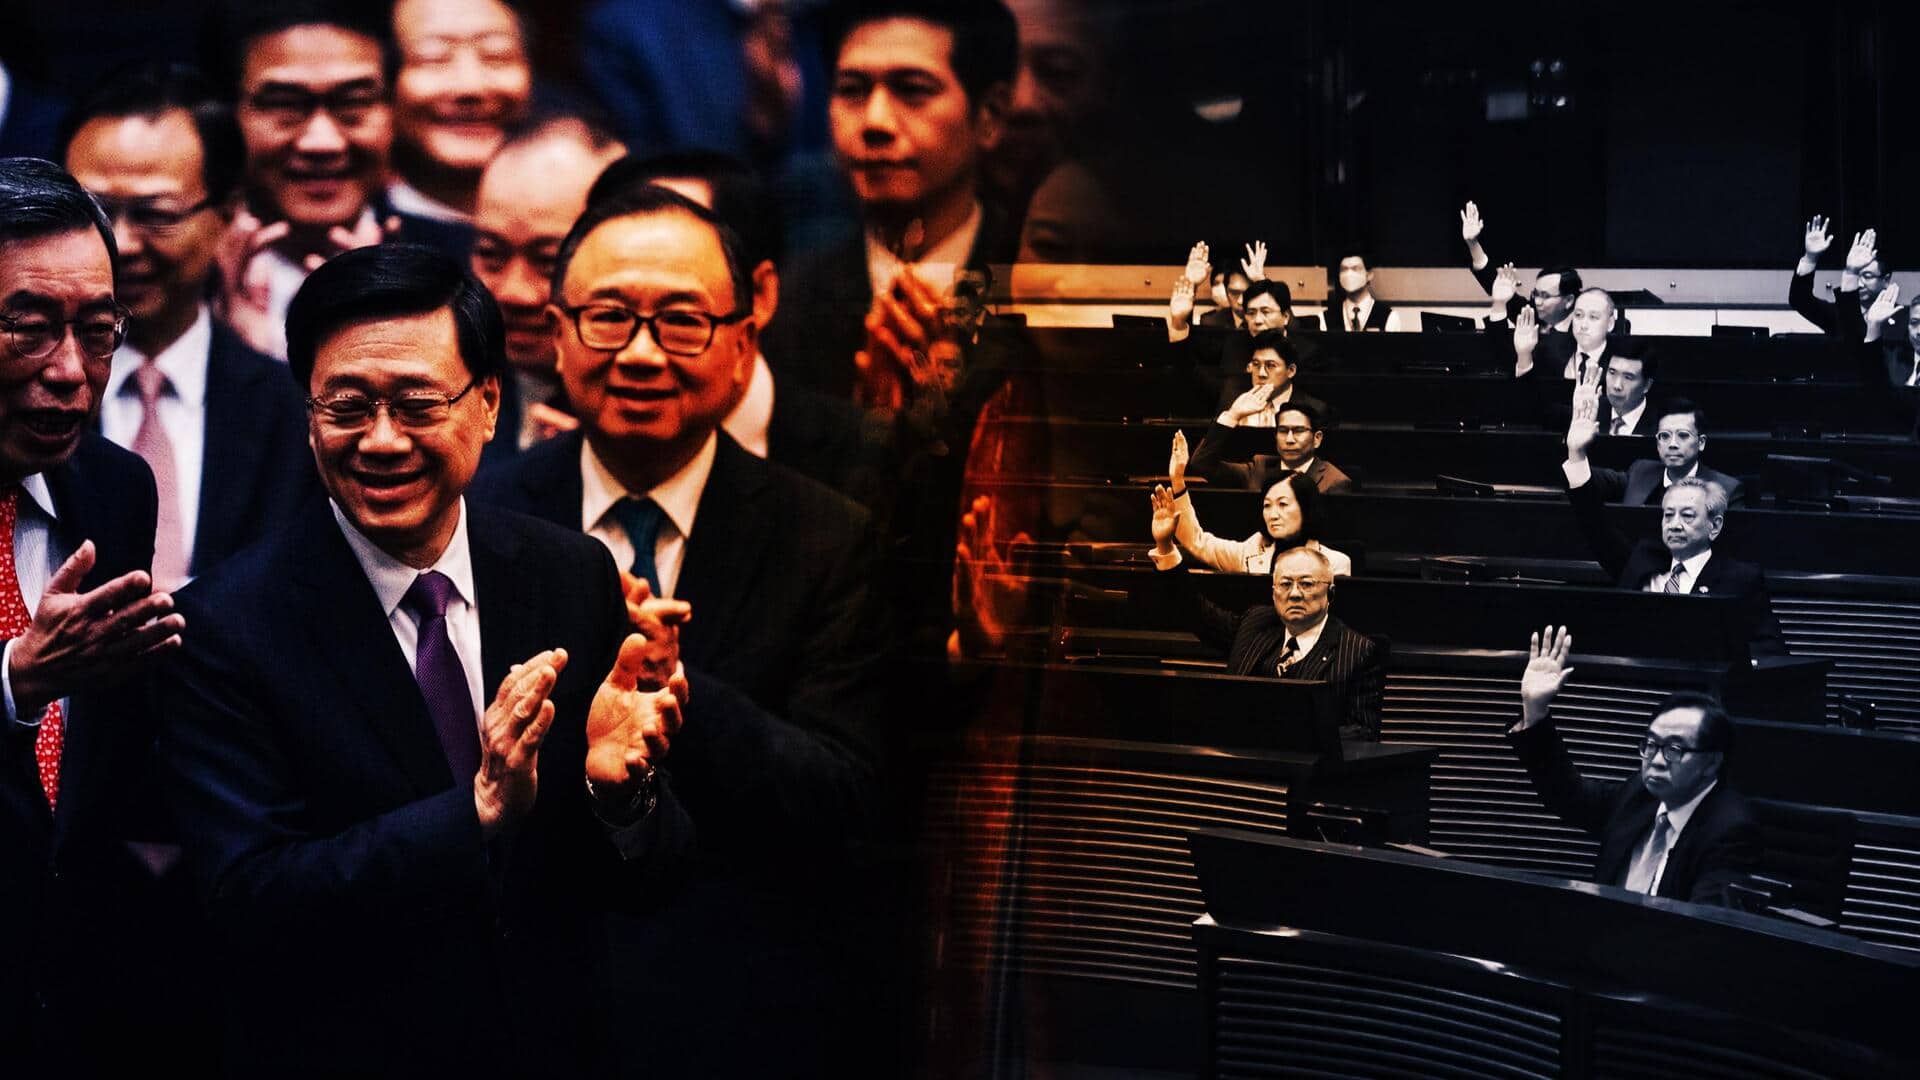 What's Article 23, Hong Kong's new draconian national security law? 